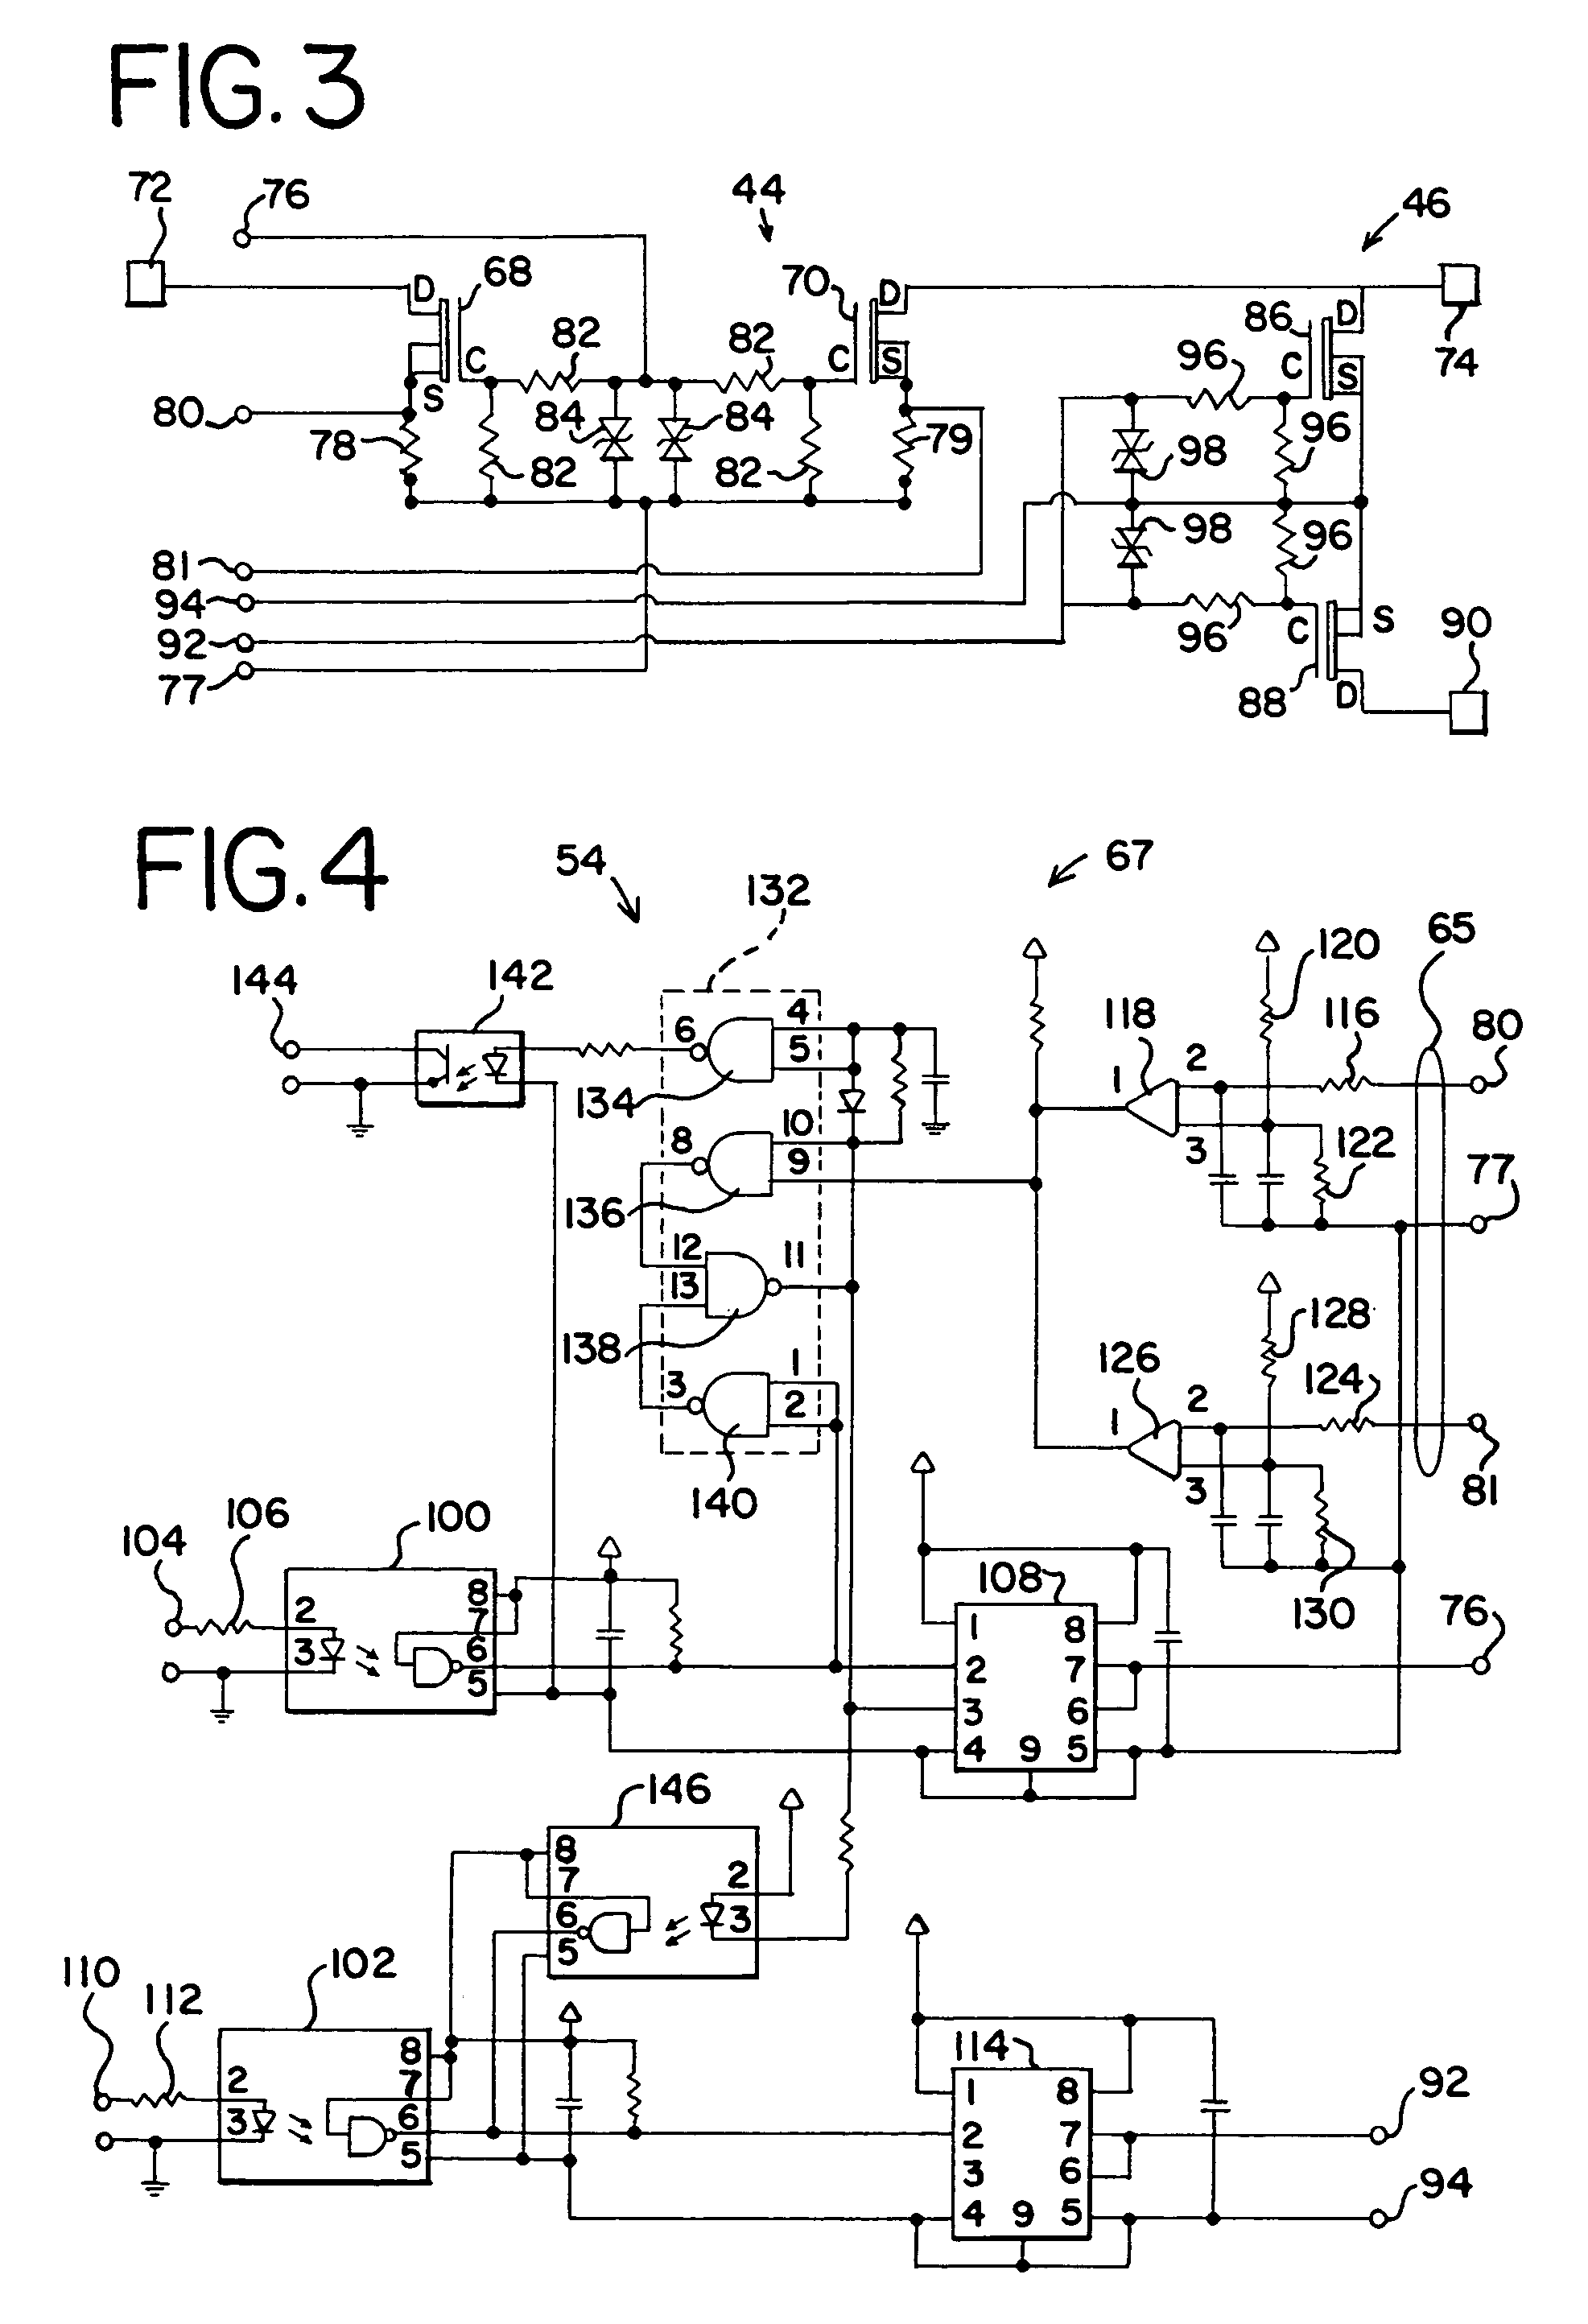 Overcurrent protection for solid state switching system